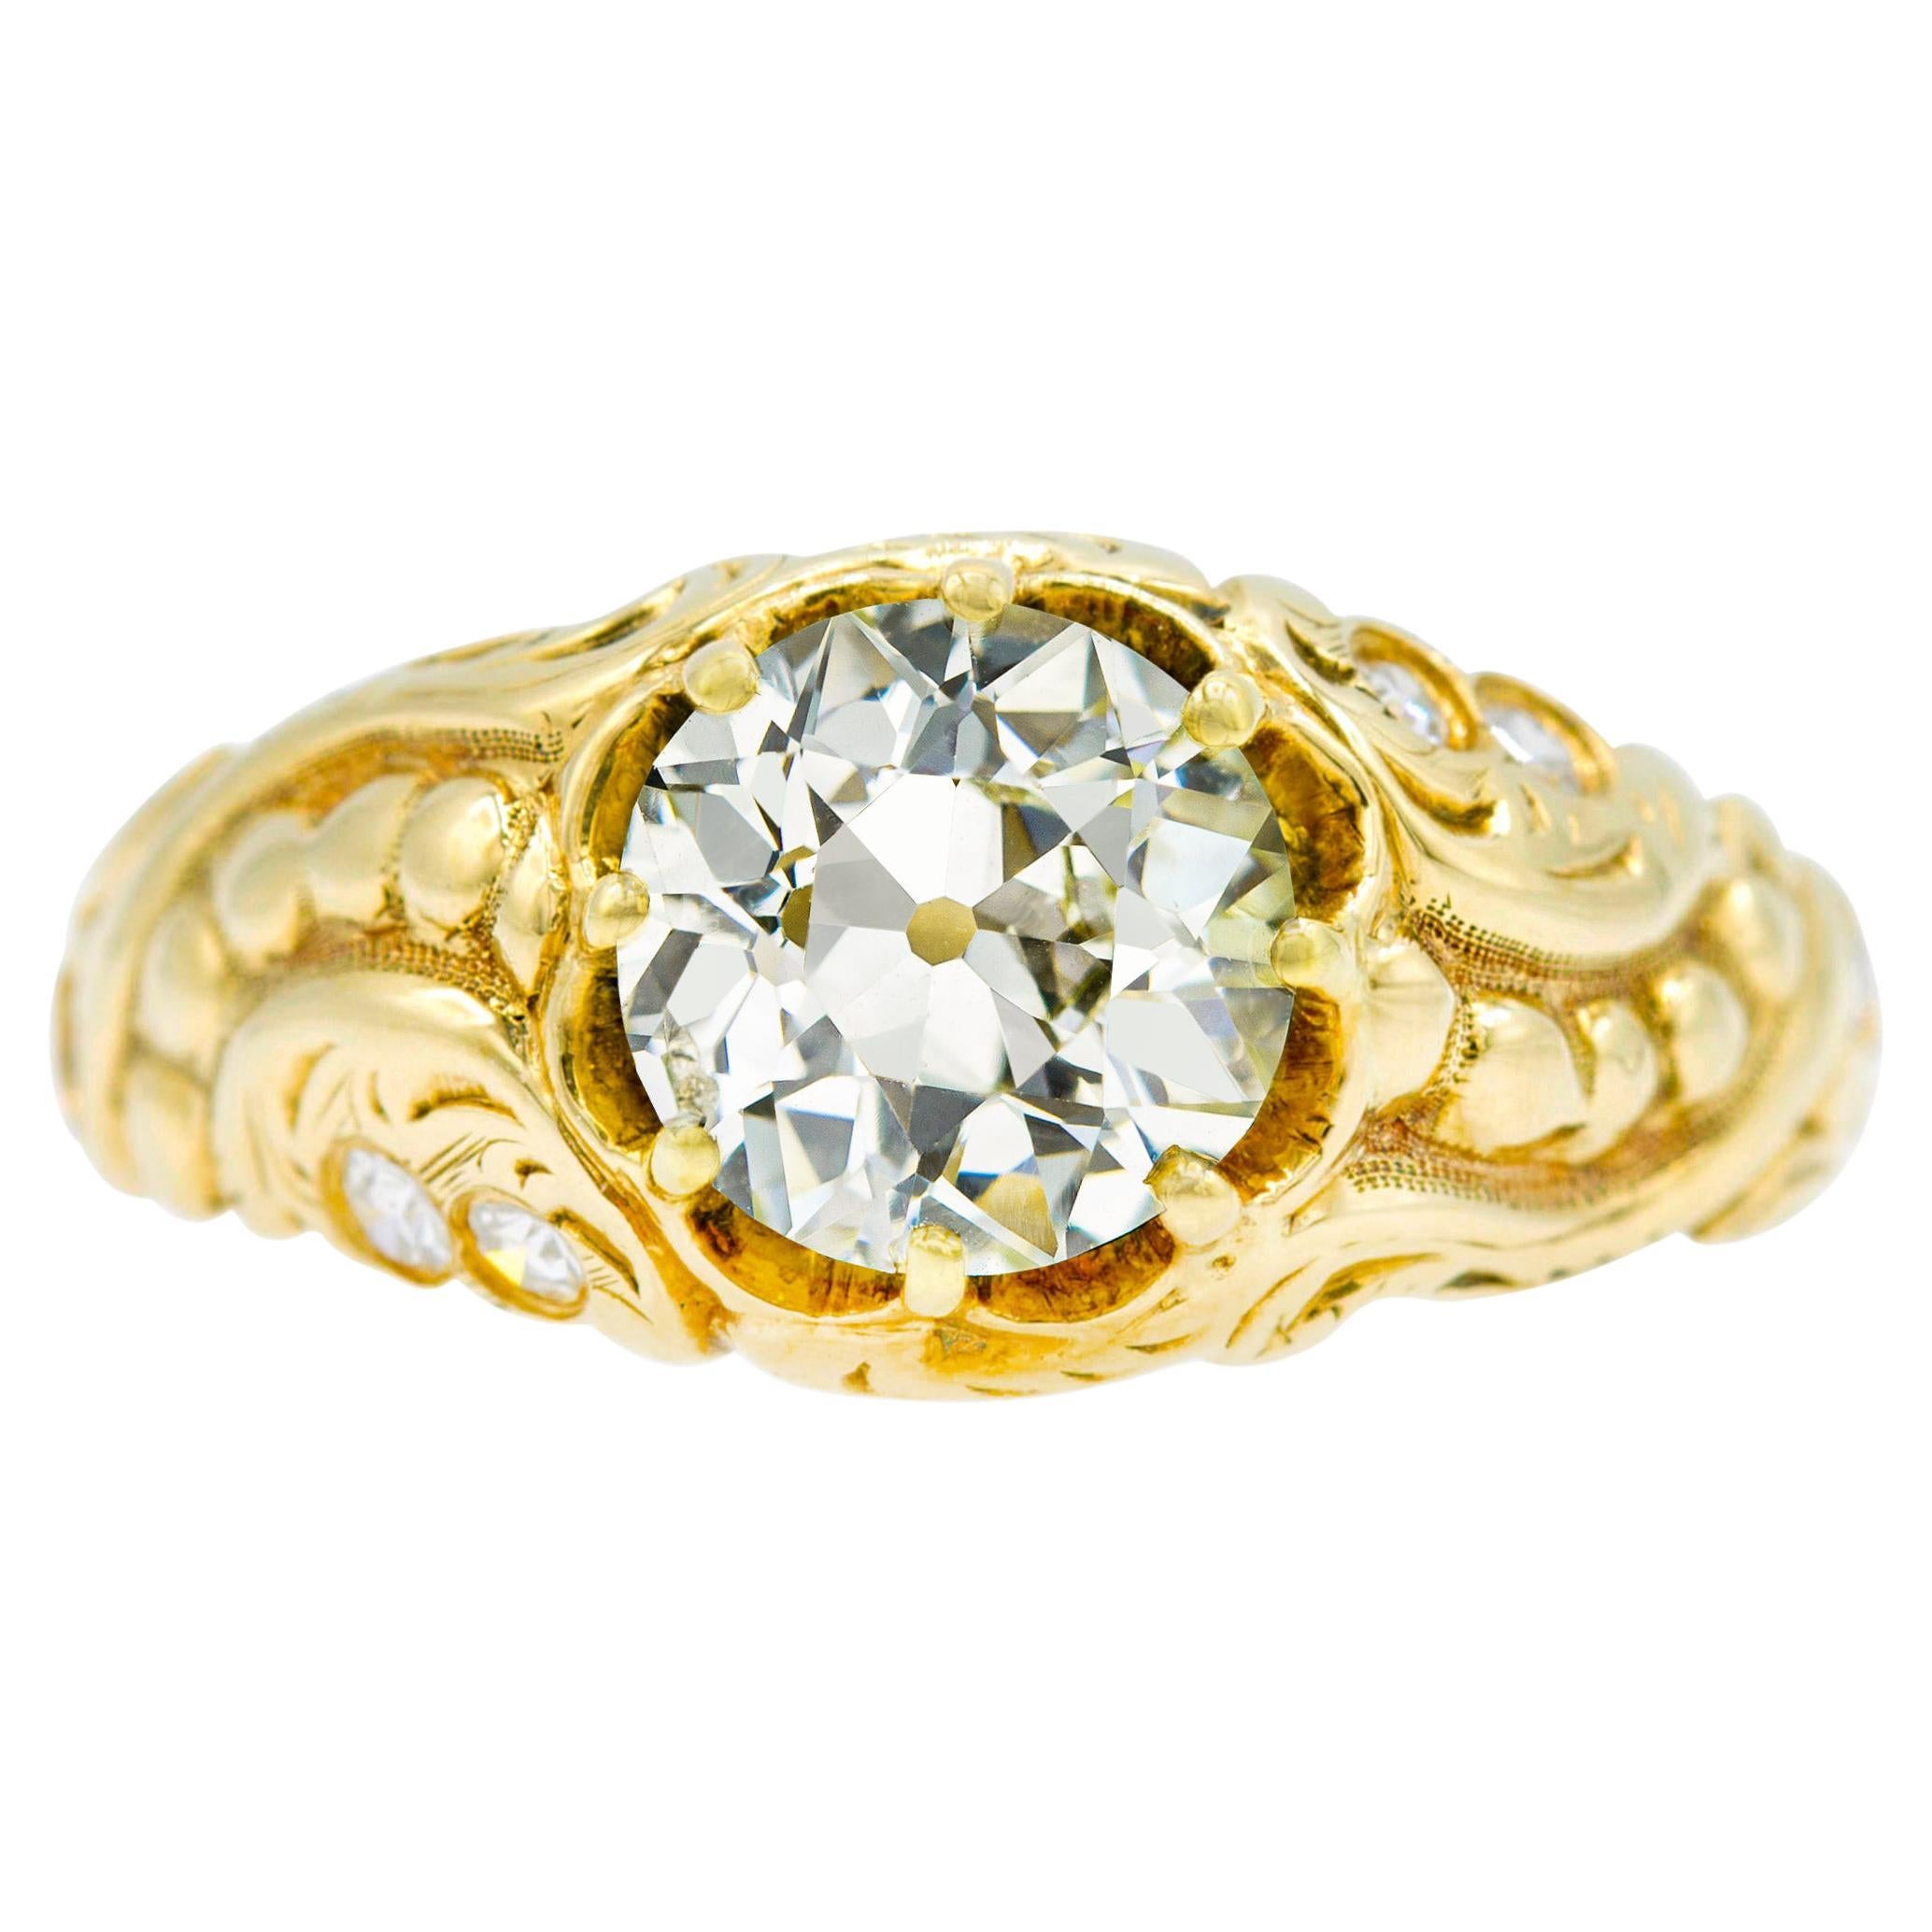 Victorian 1.44 Ct. Diamond Belcher Engagement Ring GIA O-P SI2 For Sale